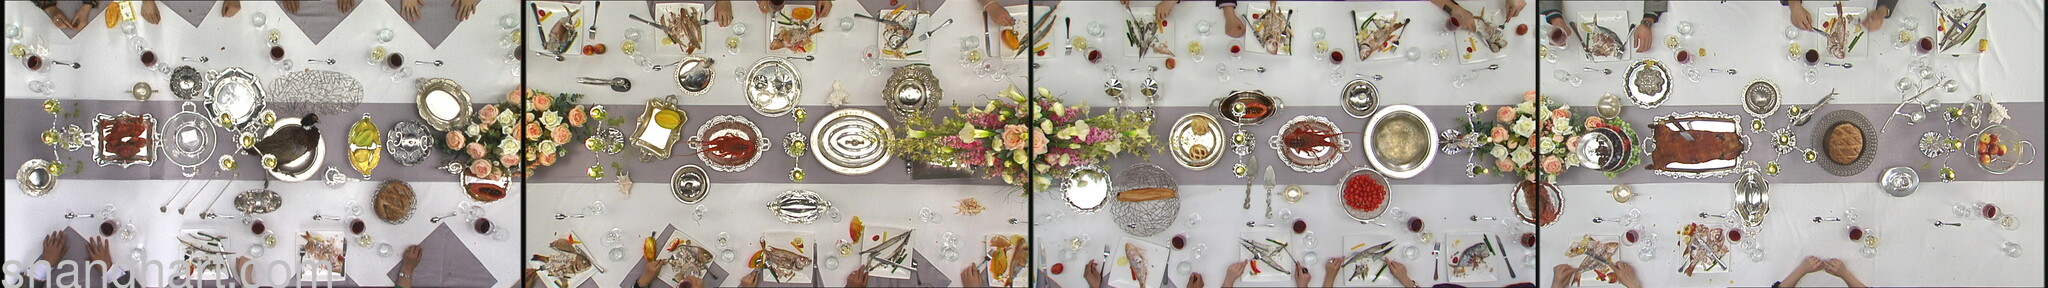 Table image